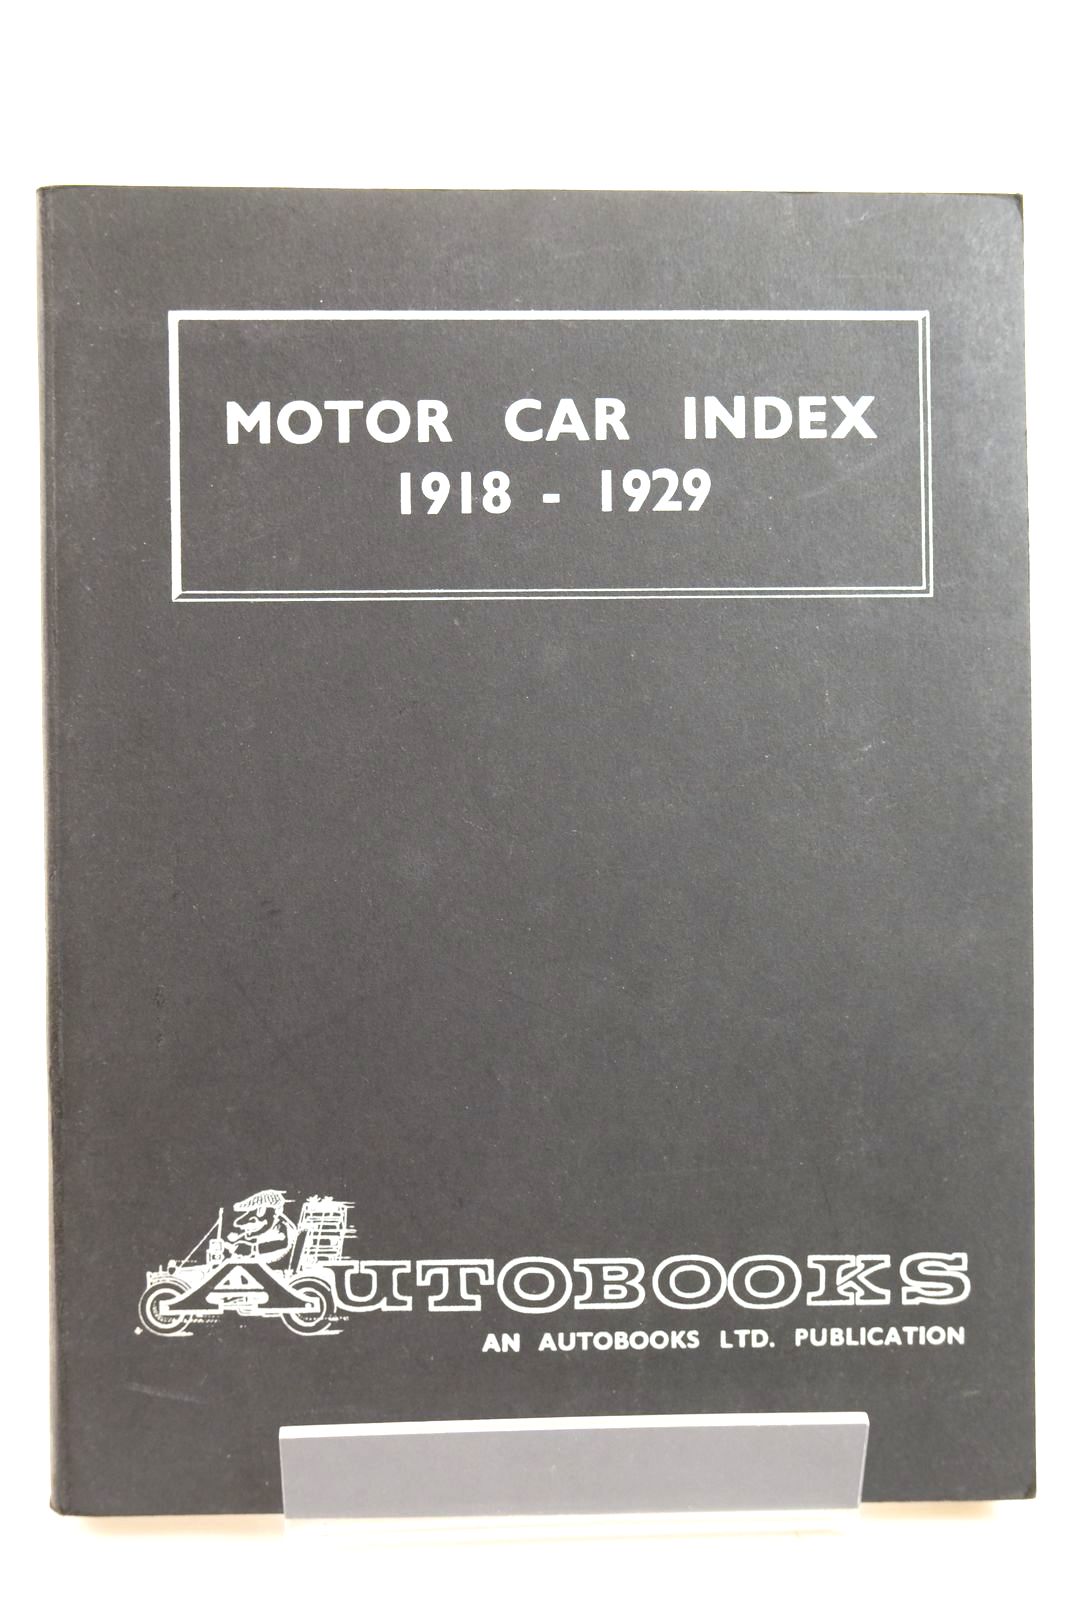 Photo of MOTOR CAR INDEX 1918 - 1929 written by Ball, Kenneth published by Autobooks Ltd. (STOCK CODE: 2132229)  for sale by Stella & Rose's Books